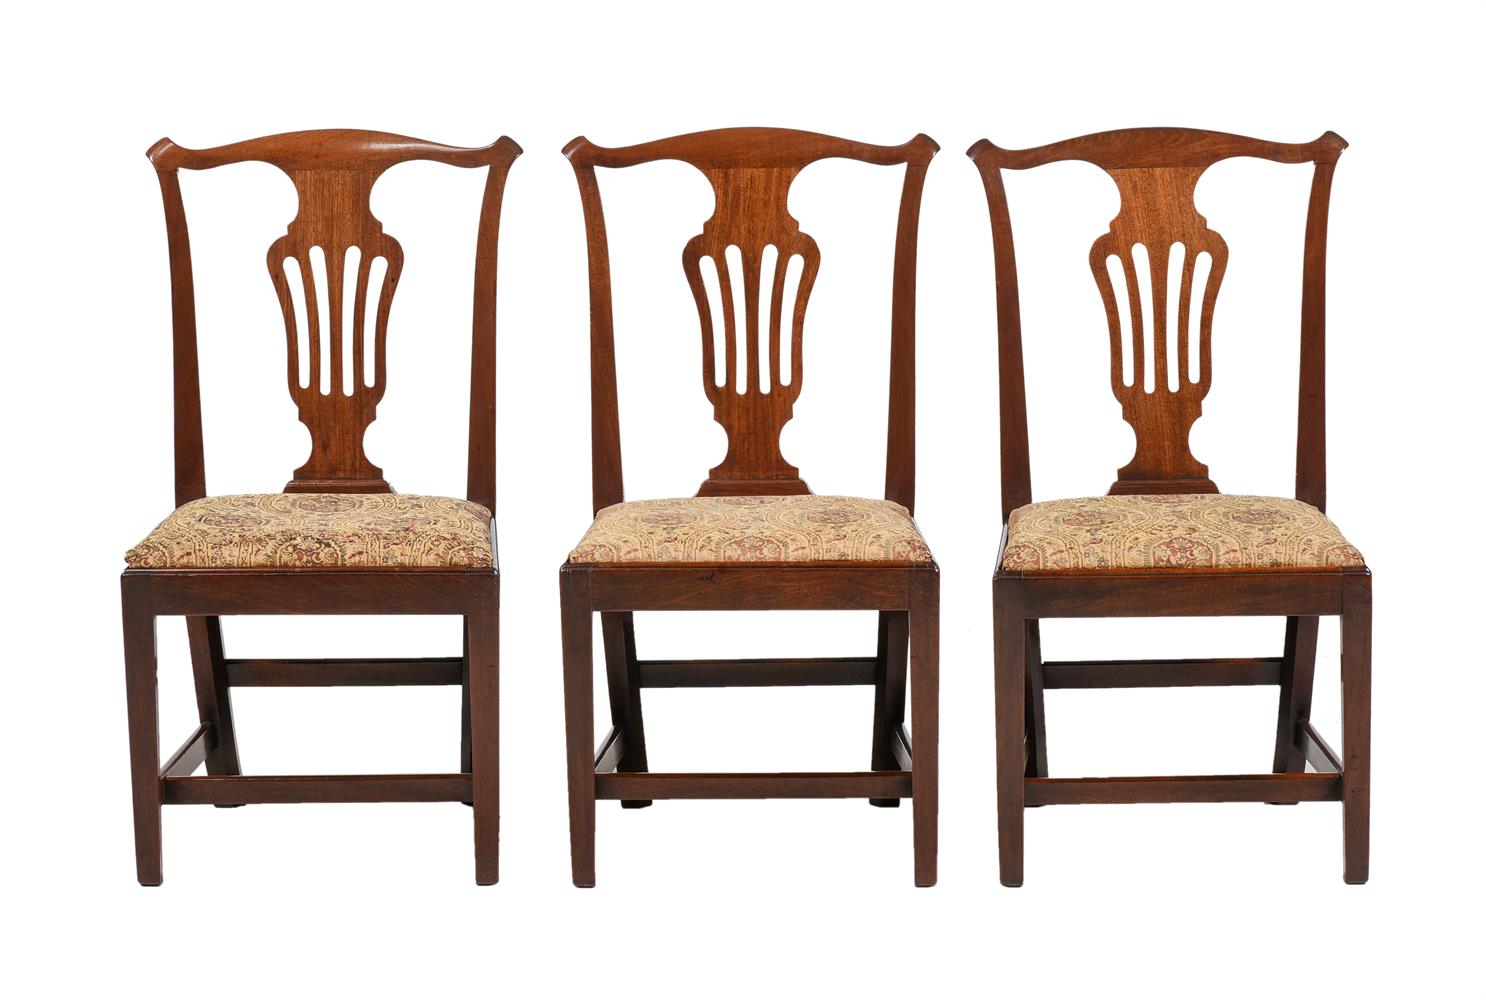 A SET OF SIX GEORGE III MAHOGANY DINING CHAIRS, CIRCA 1780 - Image 2 of 3